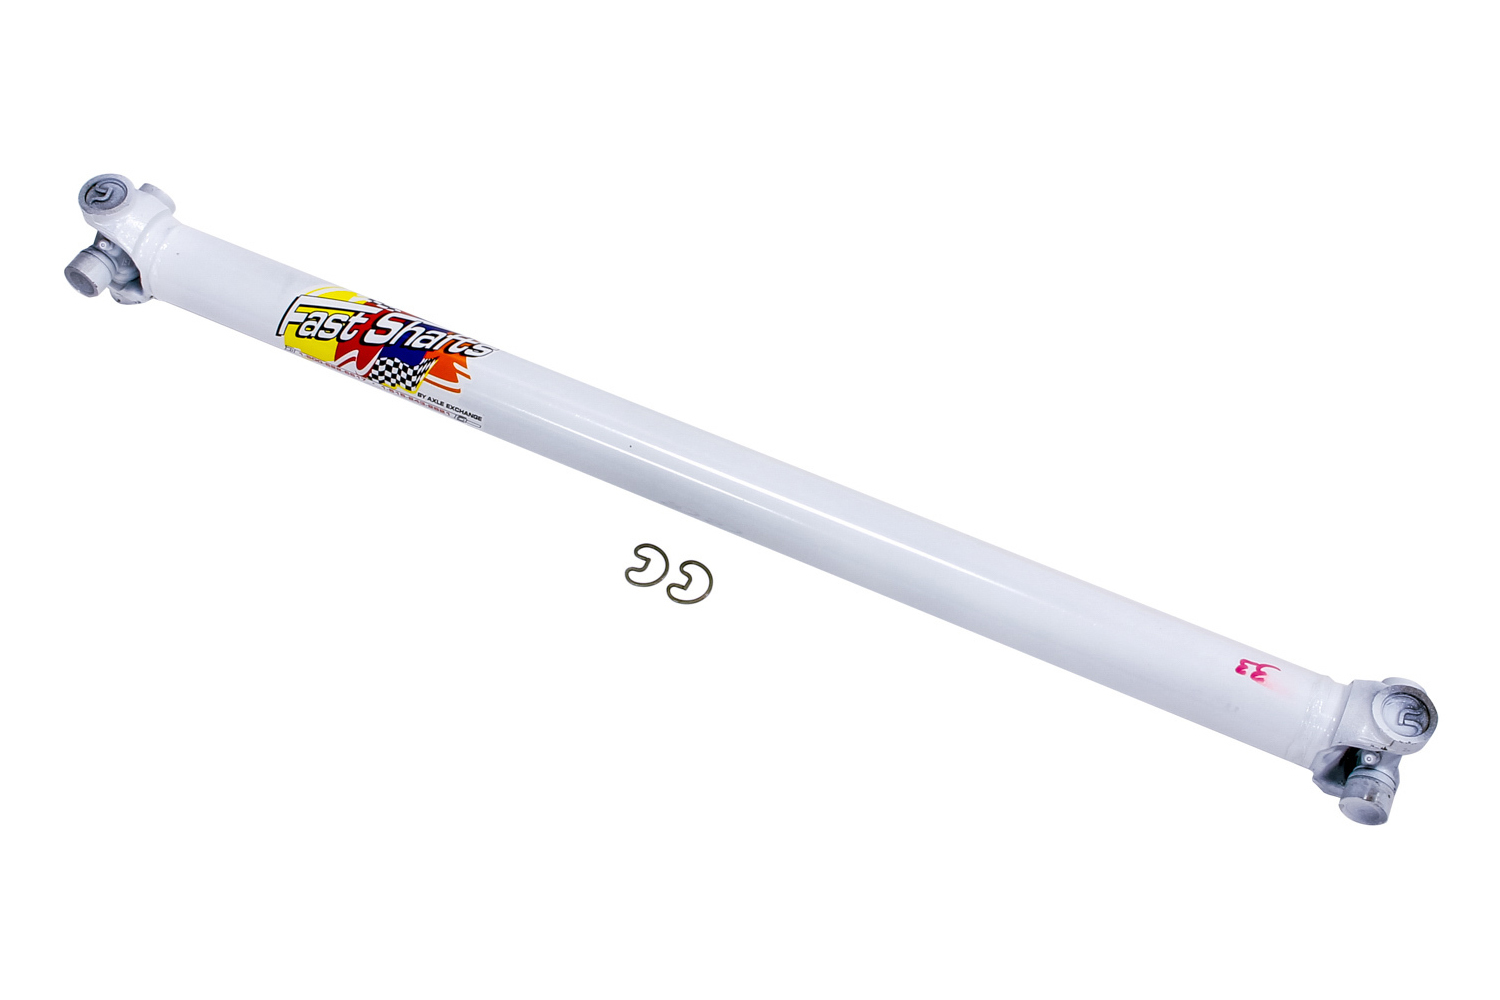 Fast Shafts 2083-29 Drive Shaft, 29 in Long, 2 in OD, 1310 U-Joints, Chromoly, White Paint, Universal, Each